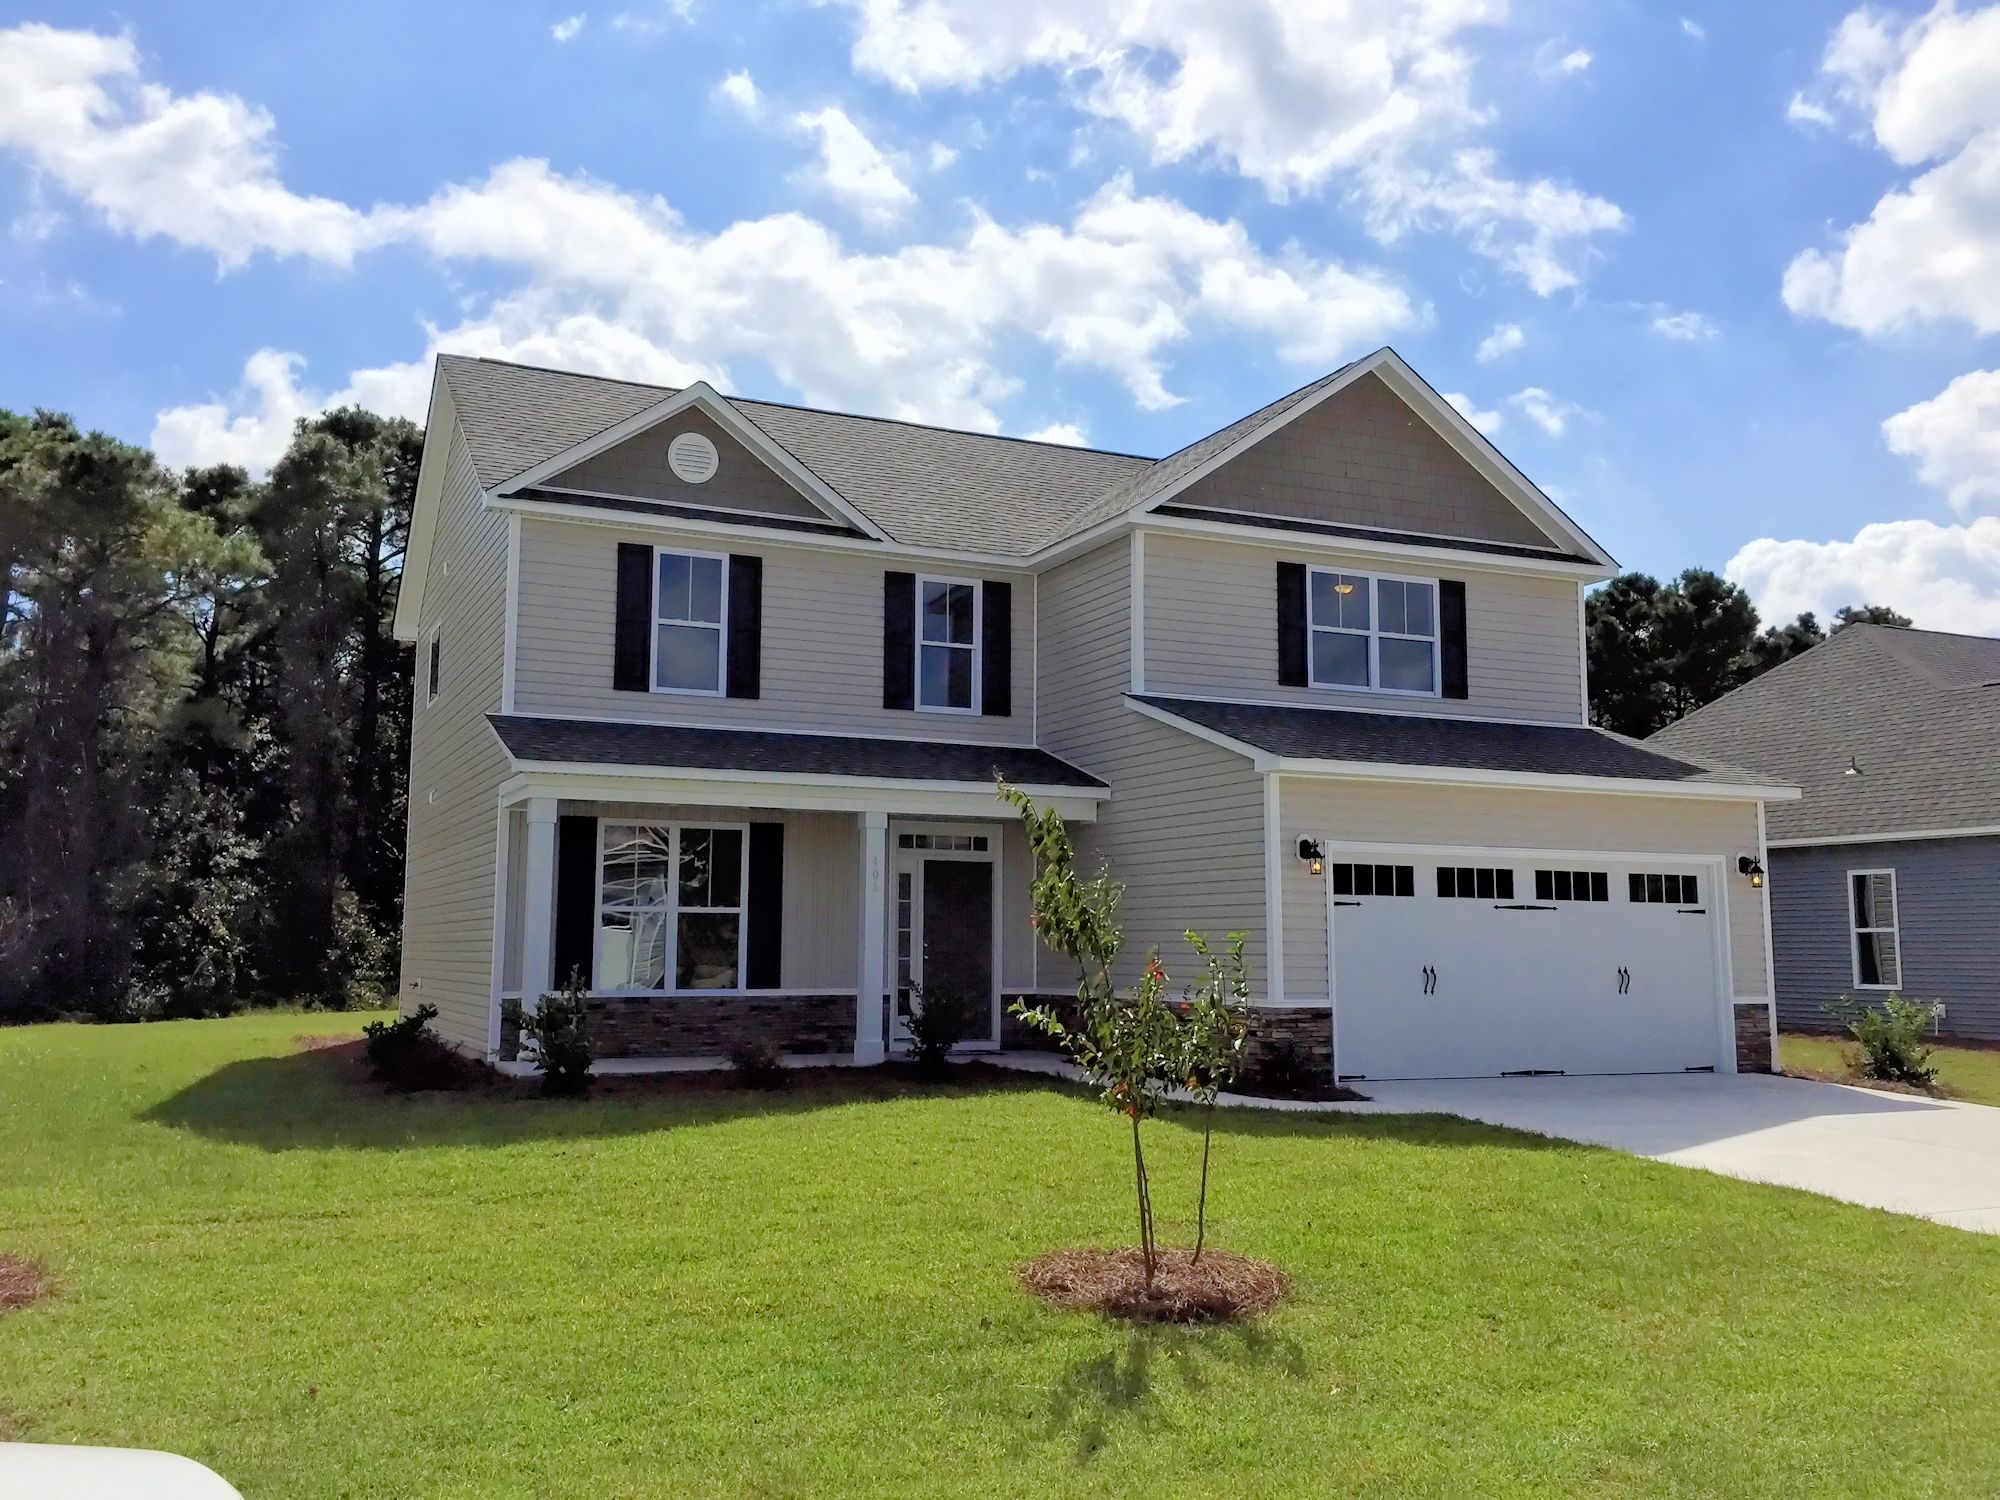 Roundtree Ridge Homes for Sale in Wilmington, NC | The ...